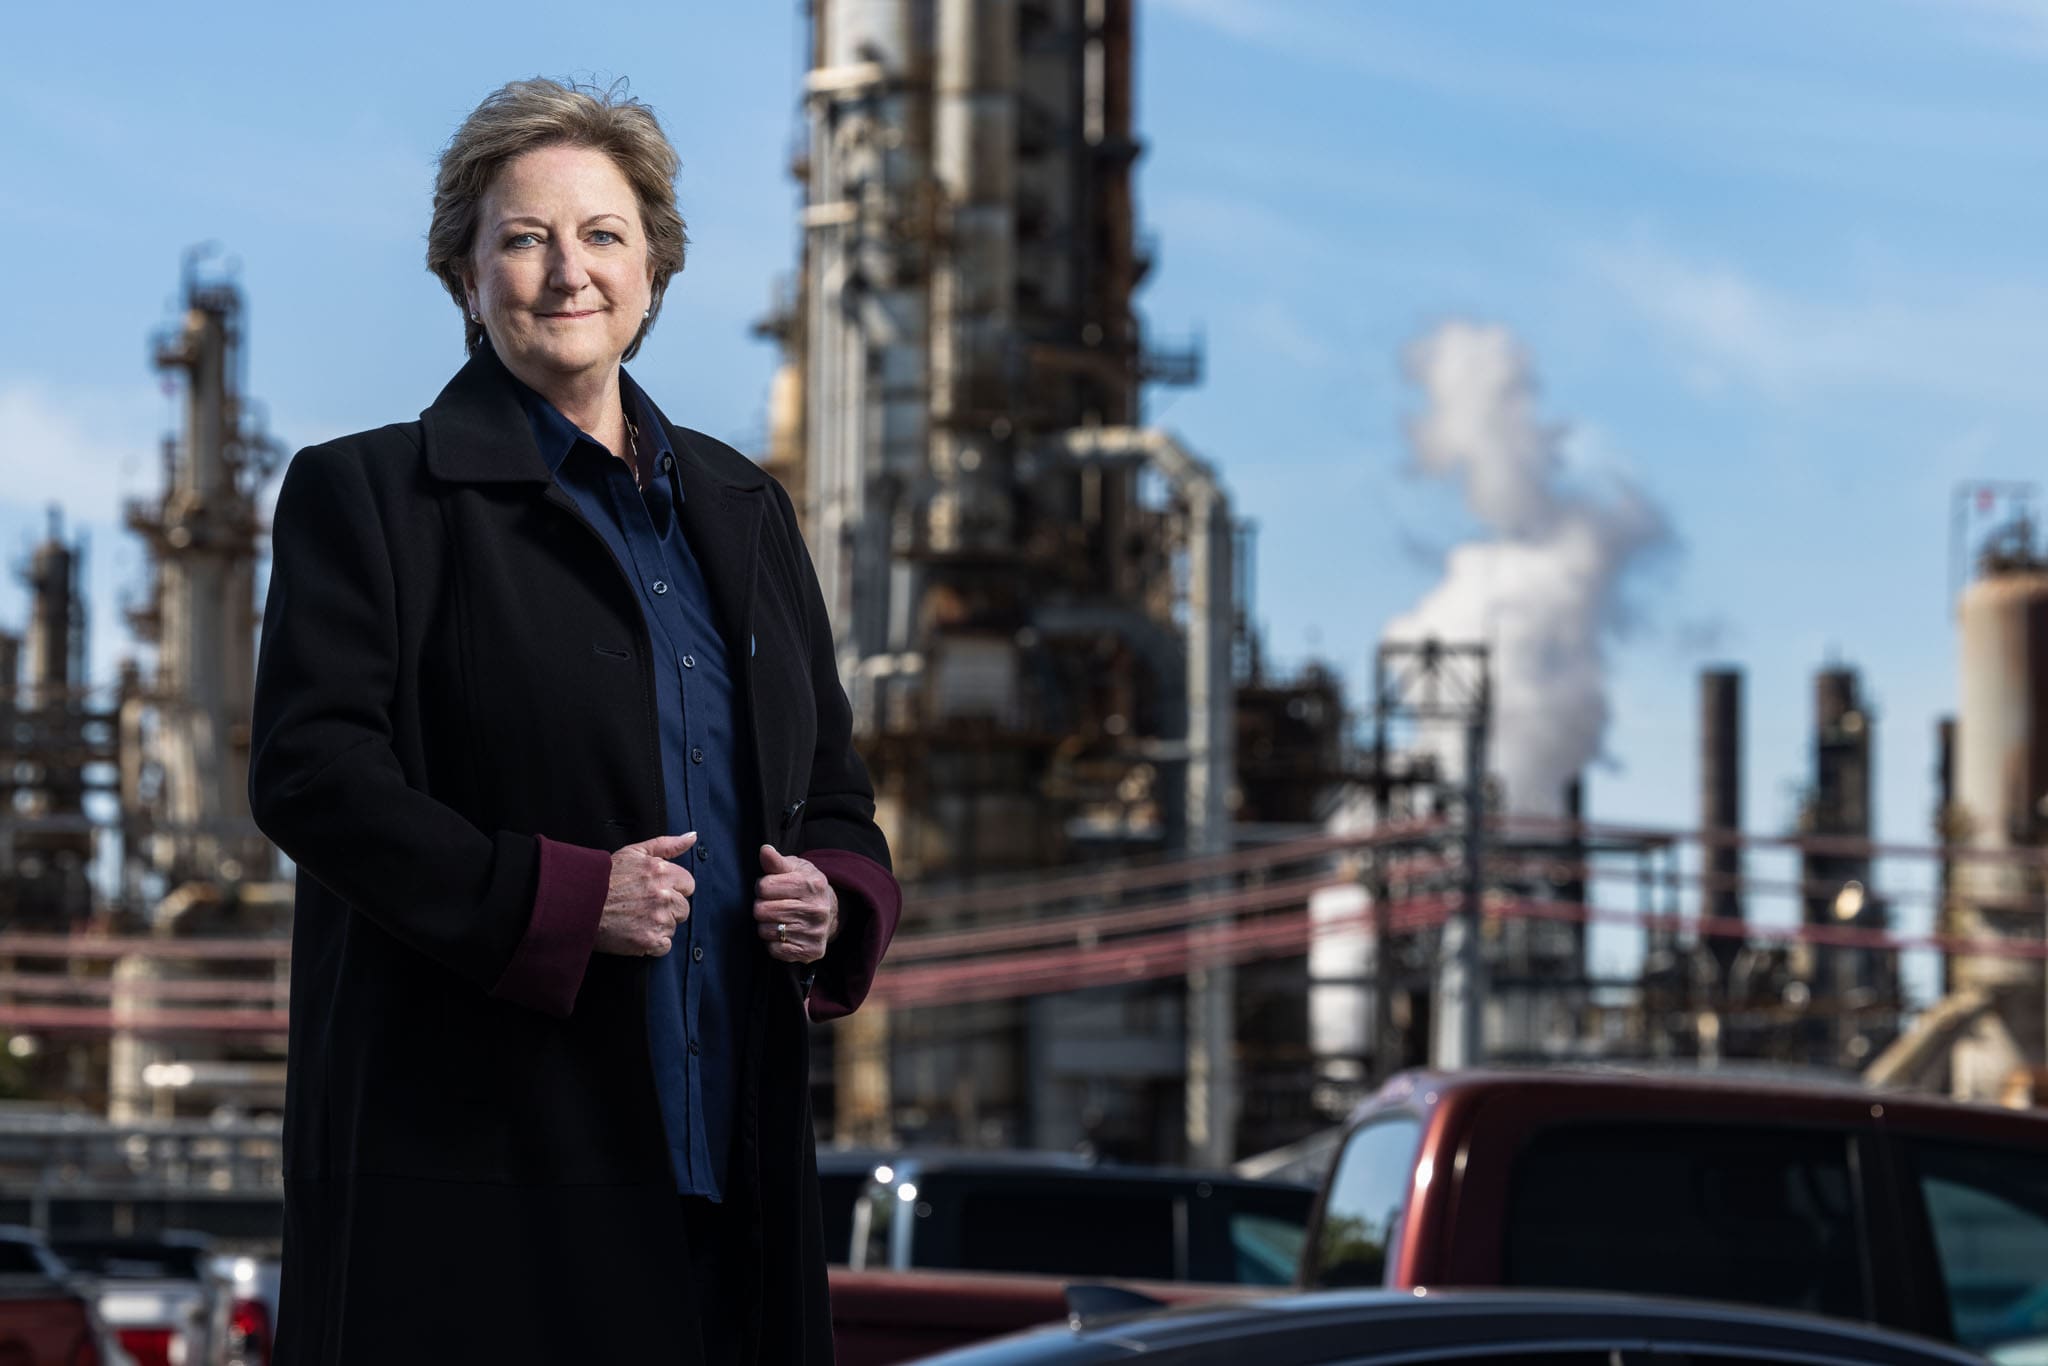 sharon-hewitt-mid-sixties-caucasian-woman-gazing-foward-with-oil-refinery-in-background